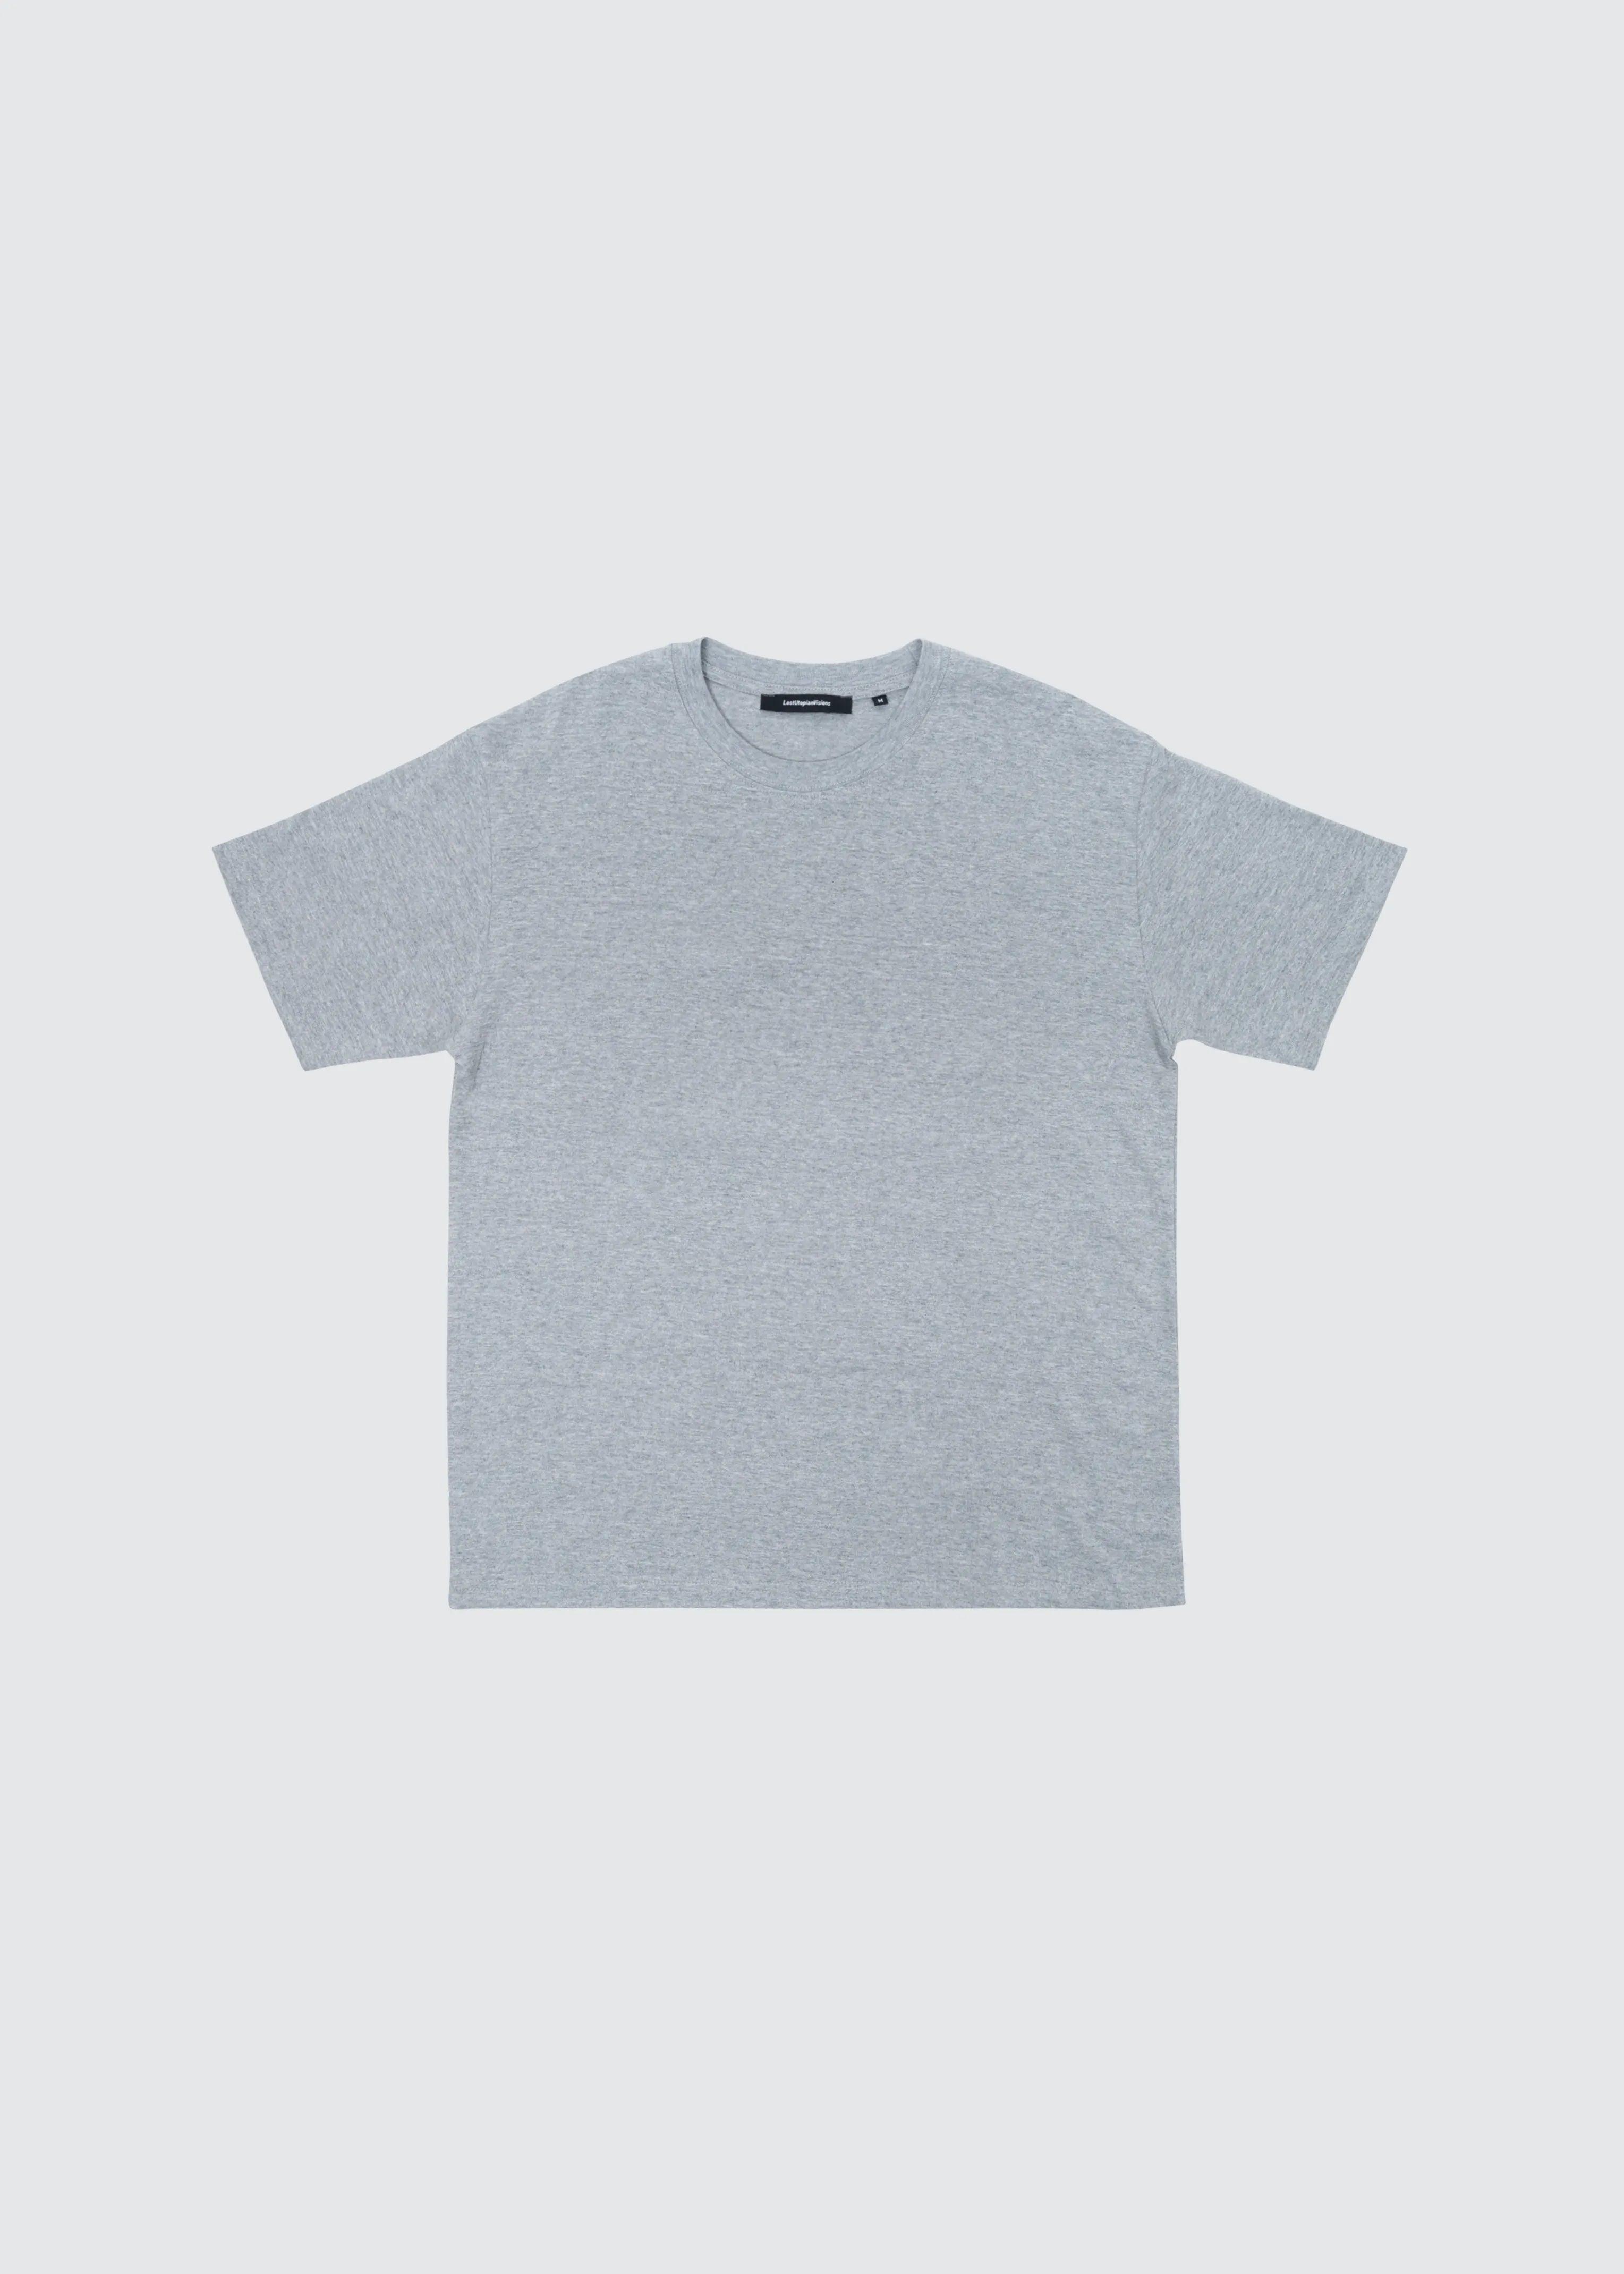 Lost Utopian Visions LUV Outline logo SS tee - Misty - SUPERCONSCIOUS BERLIN